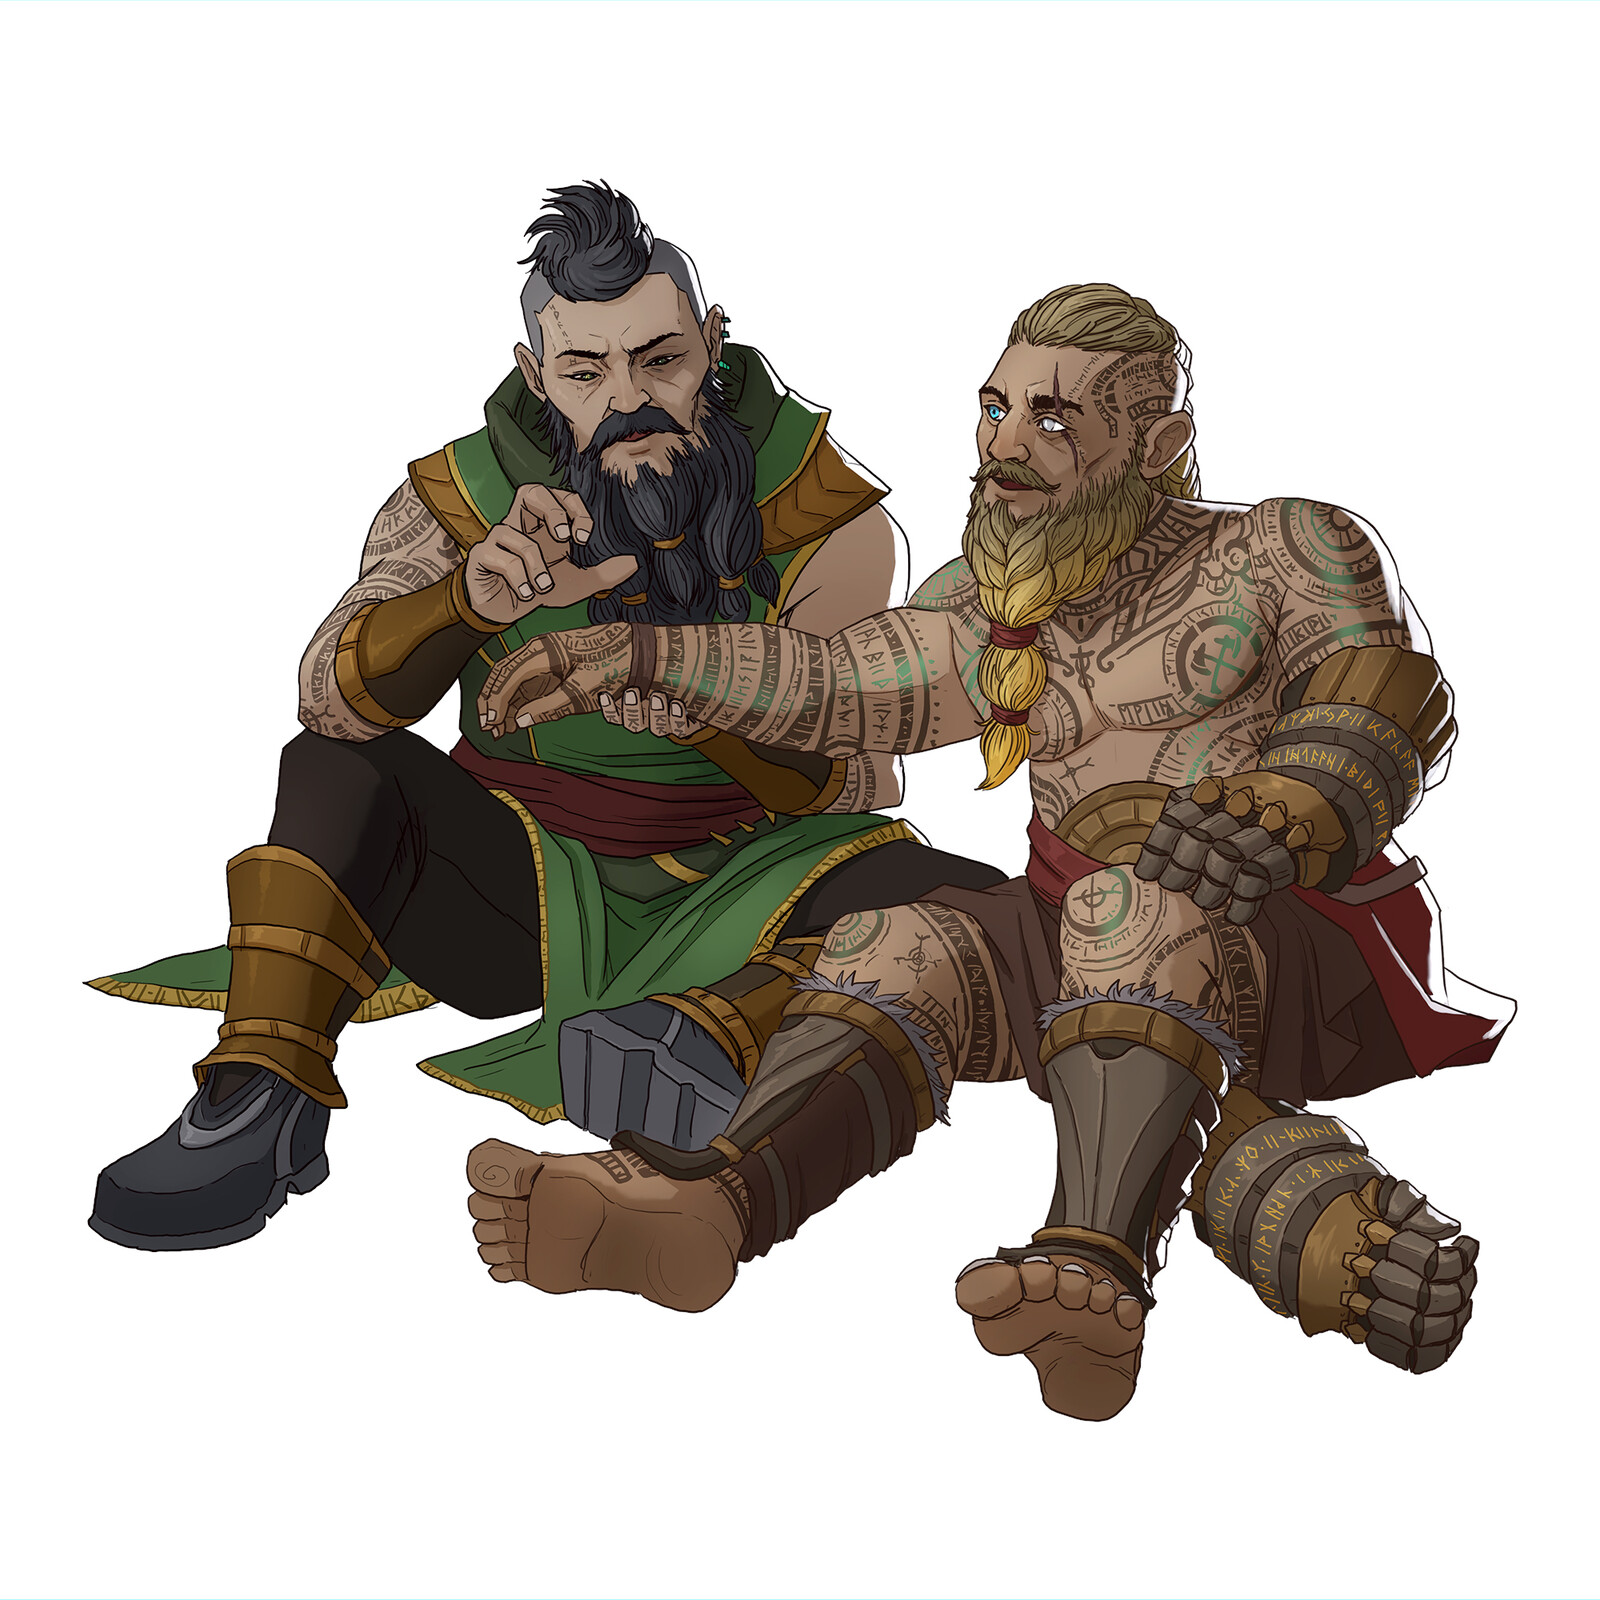 Volund, Dwarf Zealot Barbarian of Clanggaddin. And his lover, Aska, a Dwarf Cleric of Knowledge, follower of Dumathoin, and a Runesmith